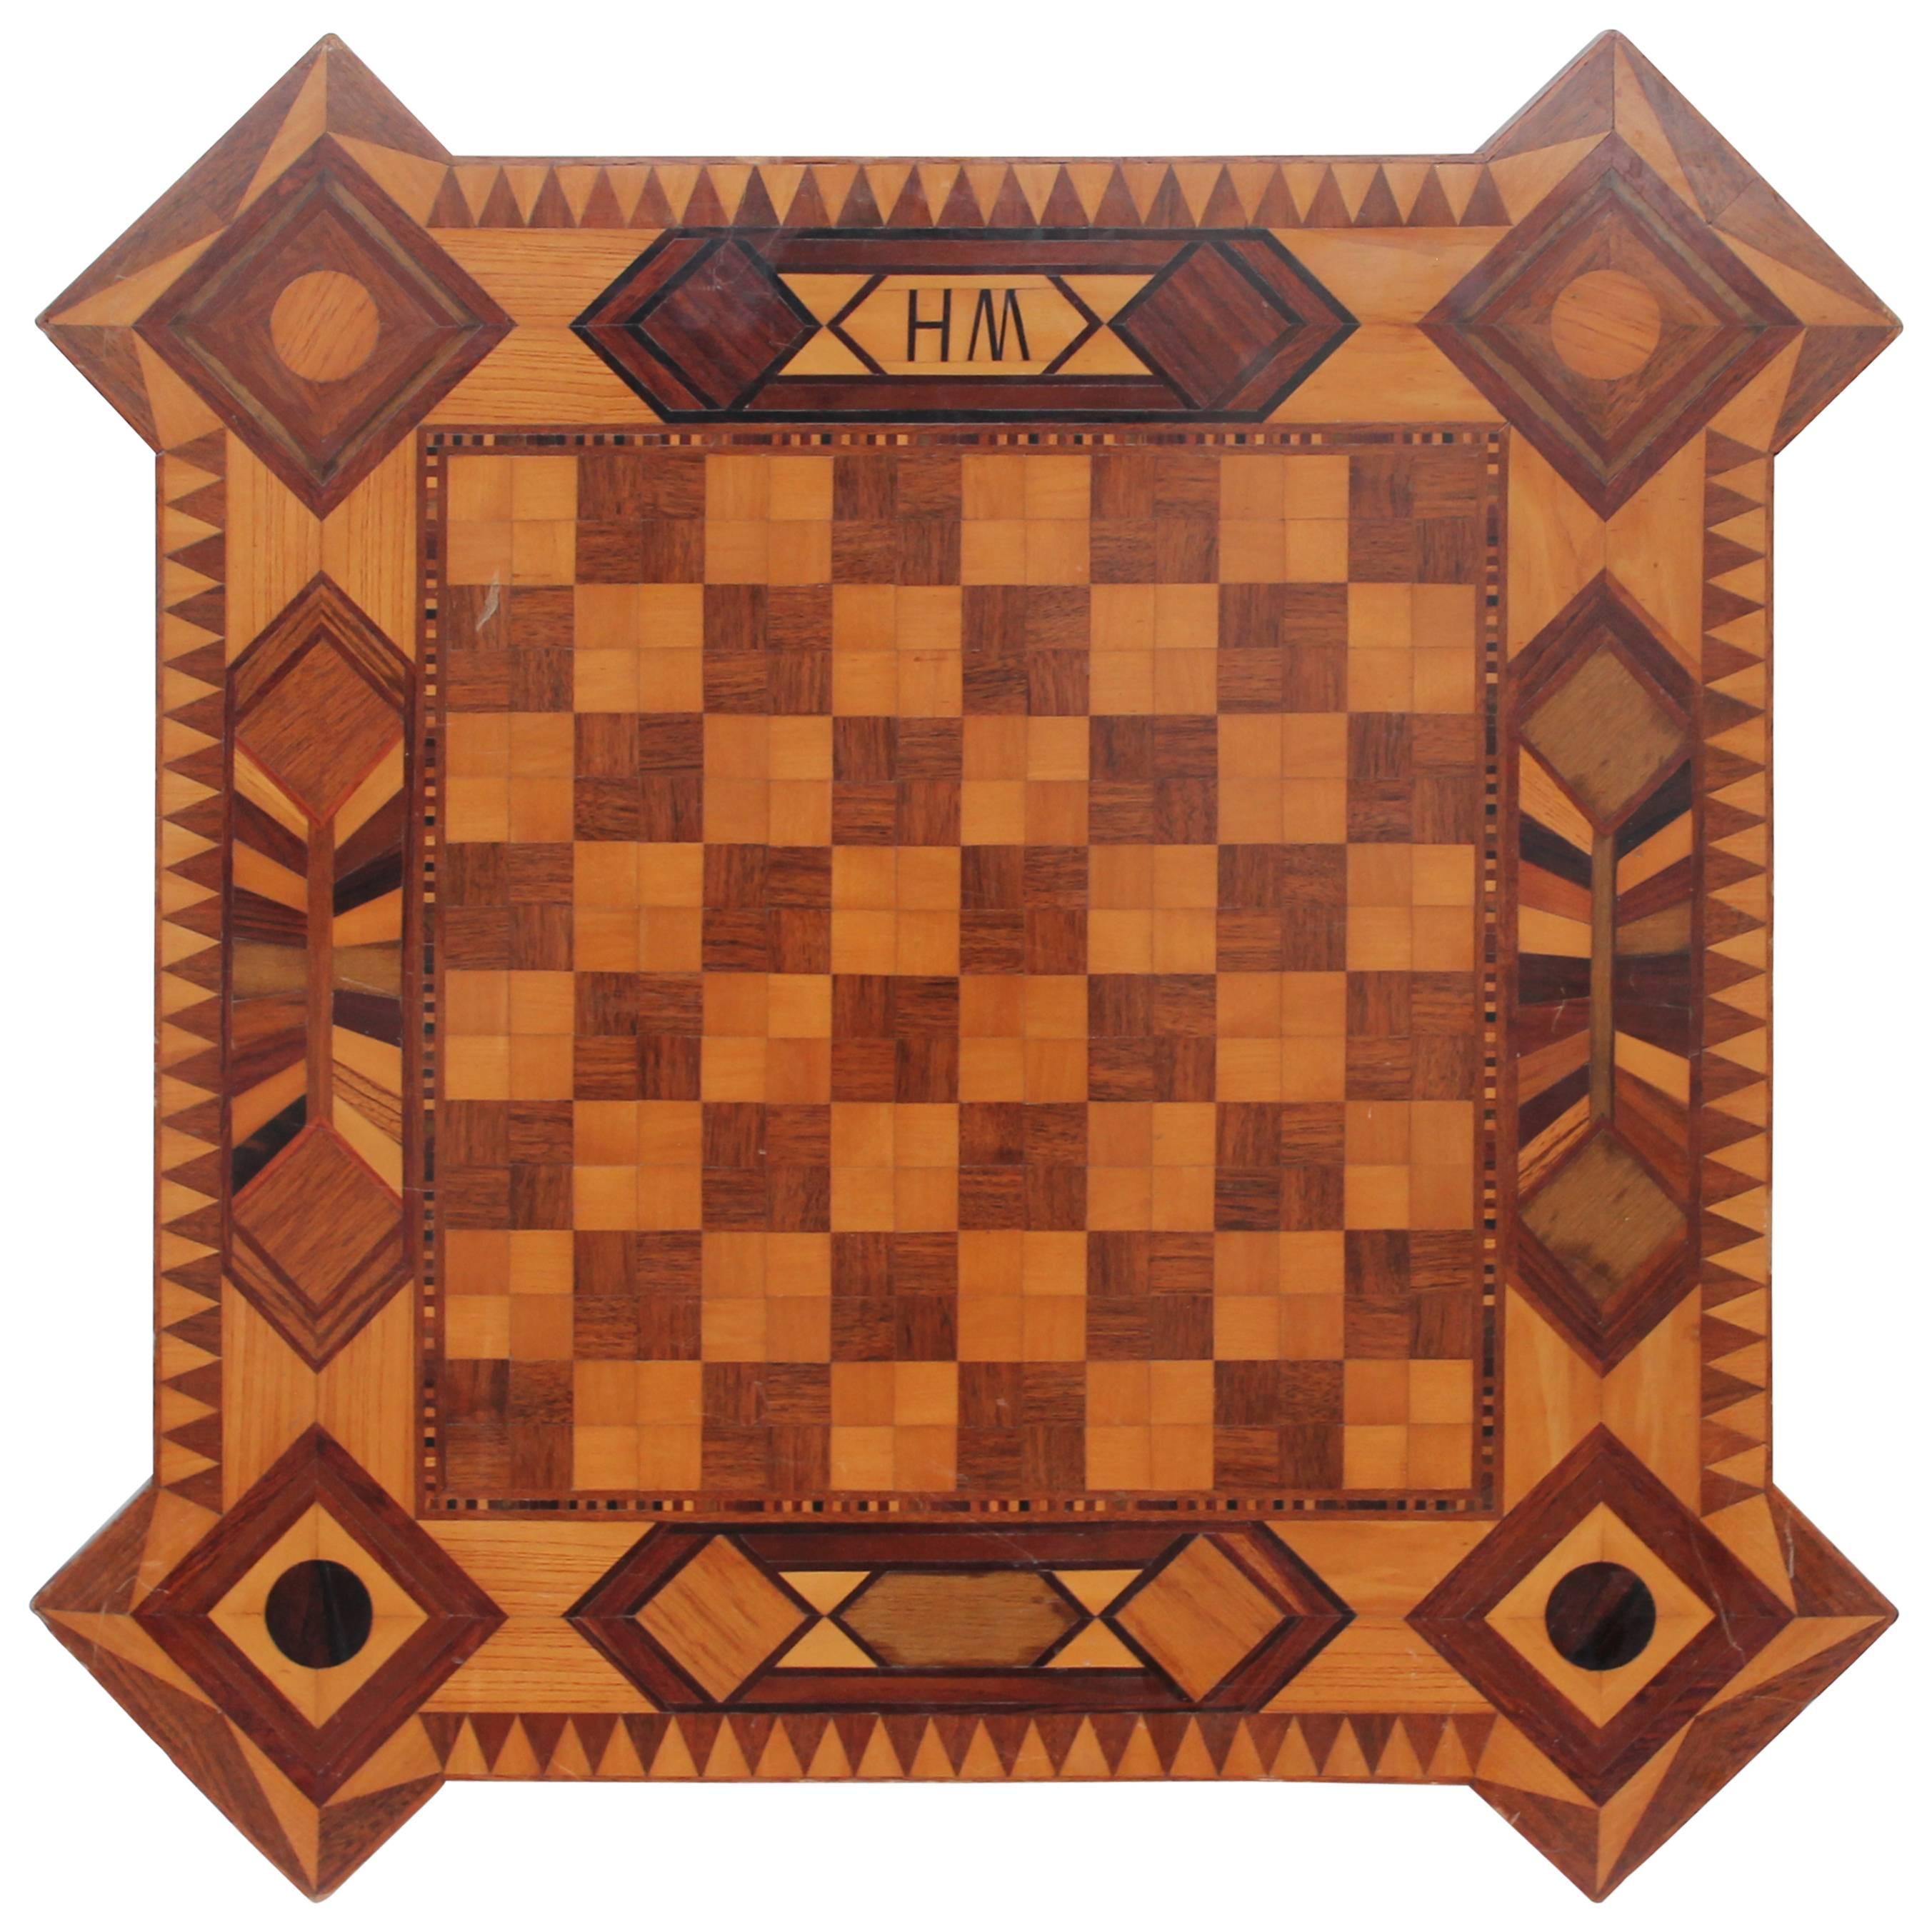 Amazing Monumental Inlaid HM Tabletop Game Board